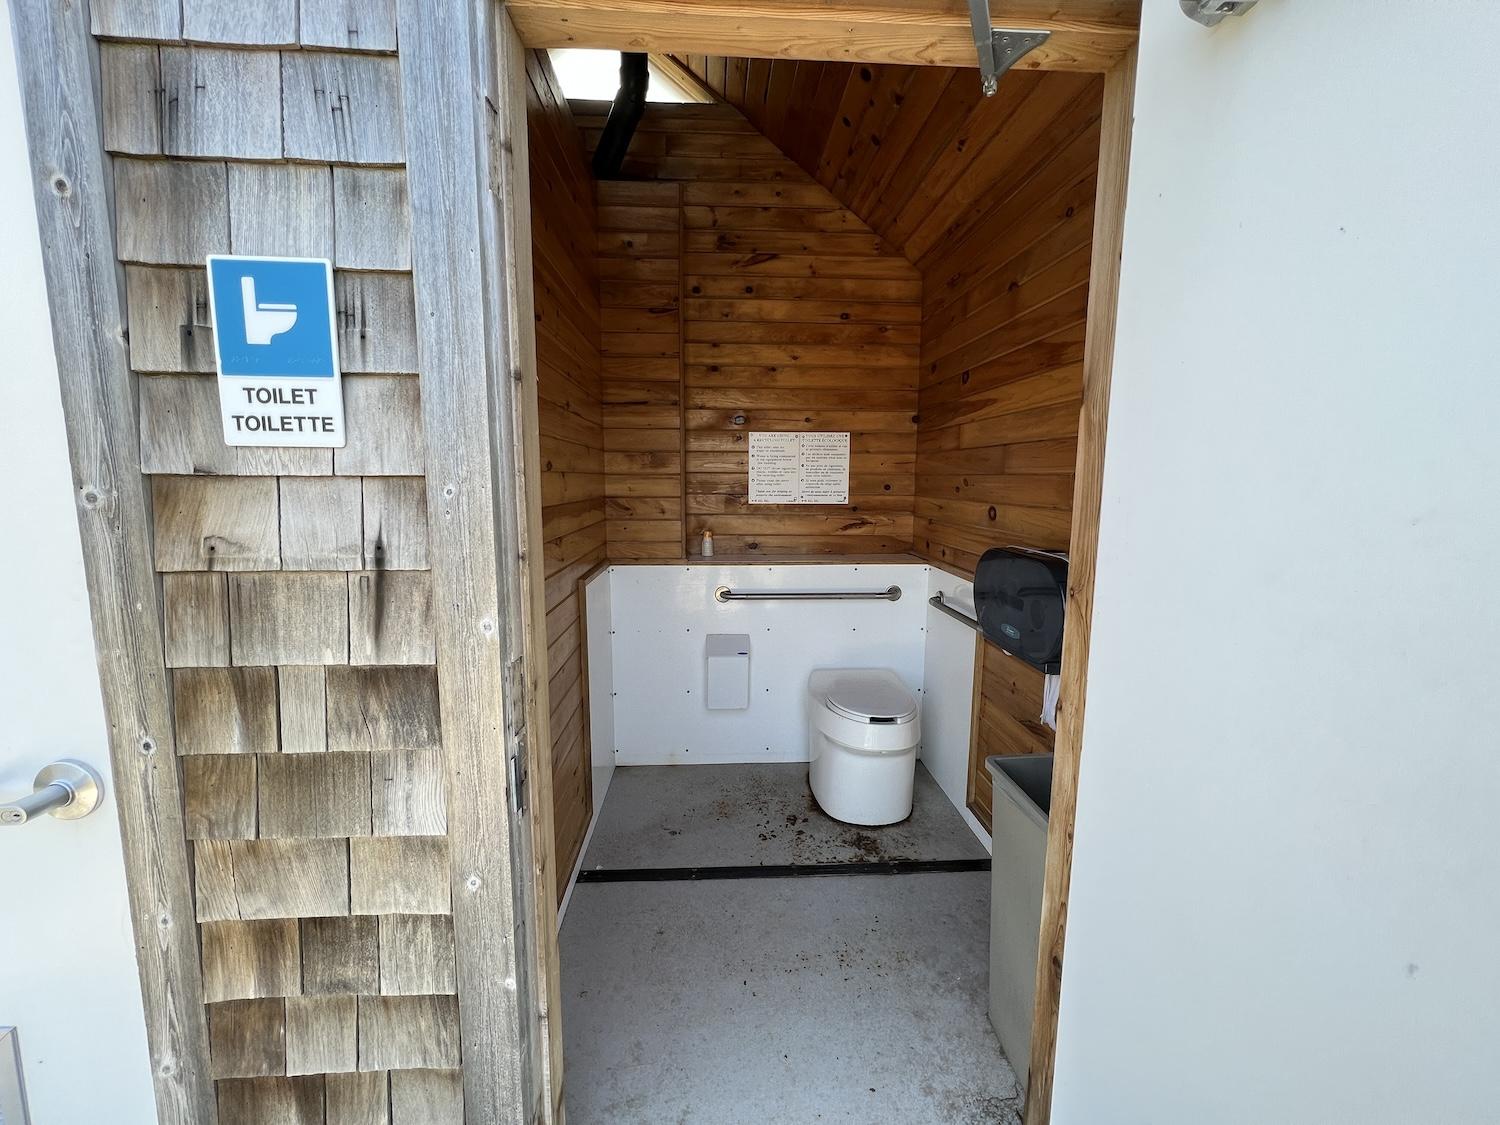 In Prince Edward Island National Park, this toilet is actually a recycling toilet.